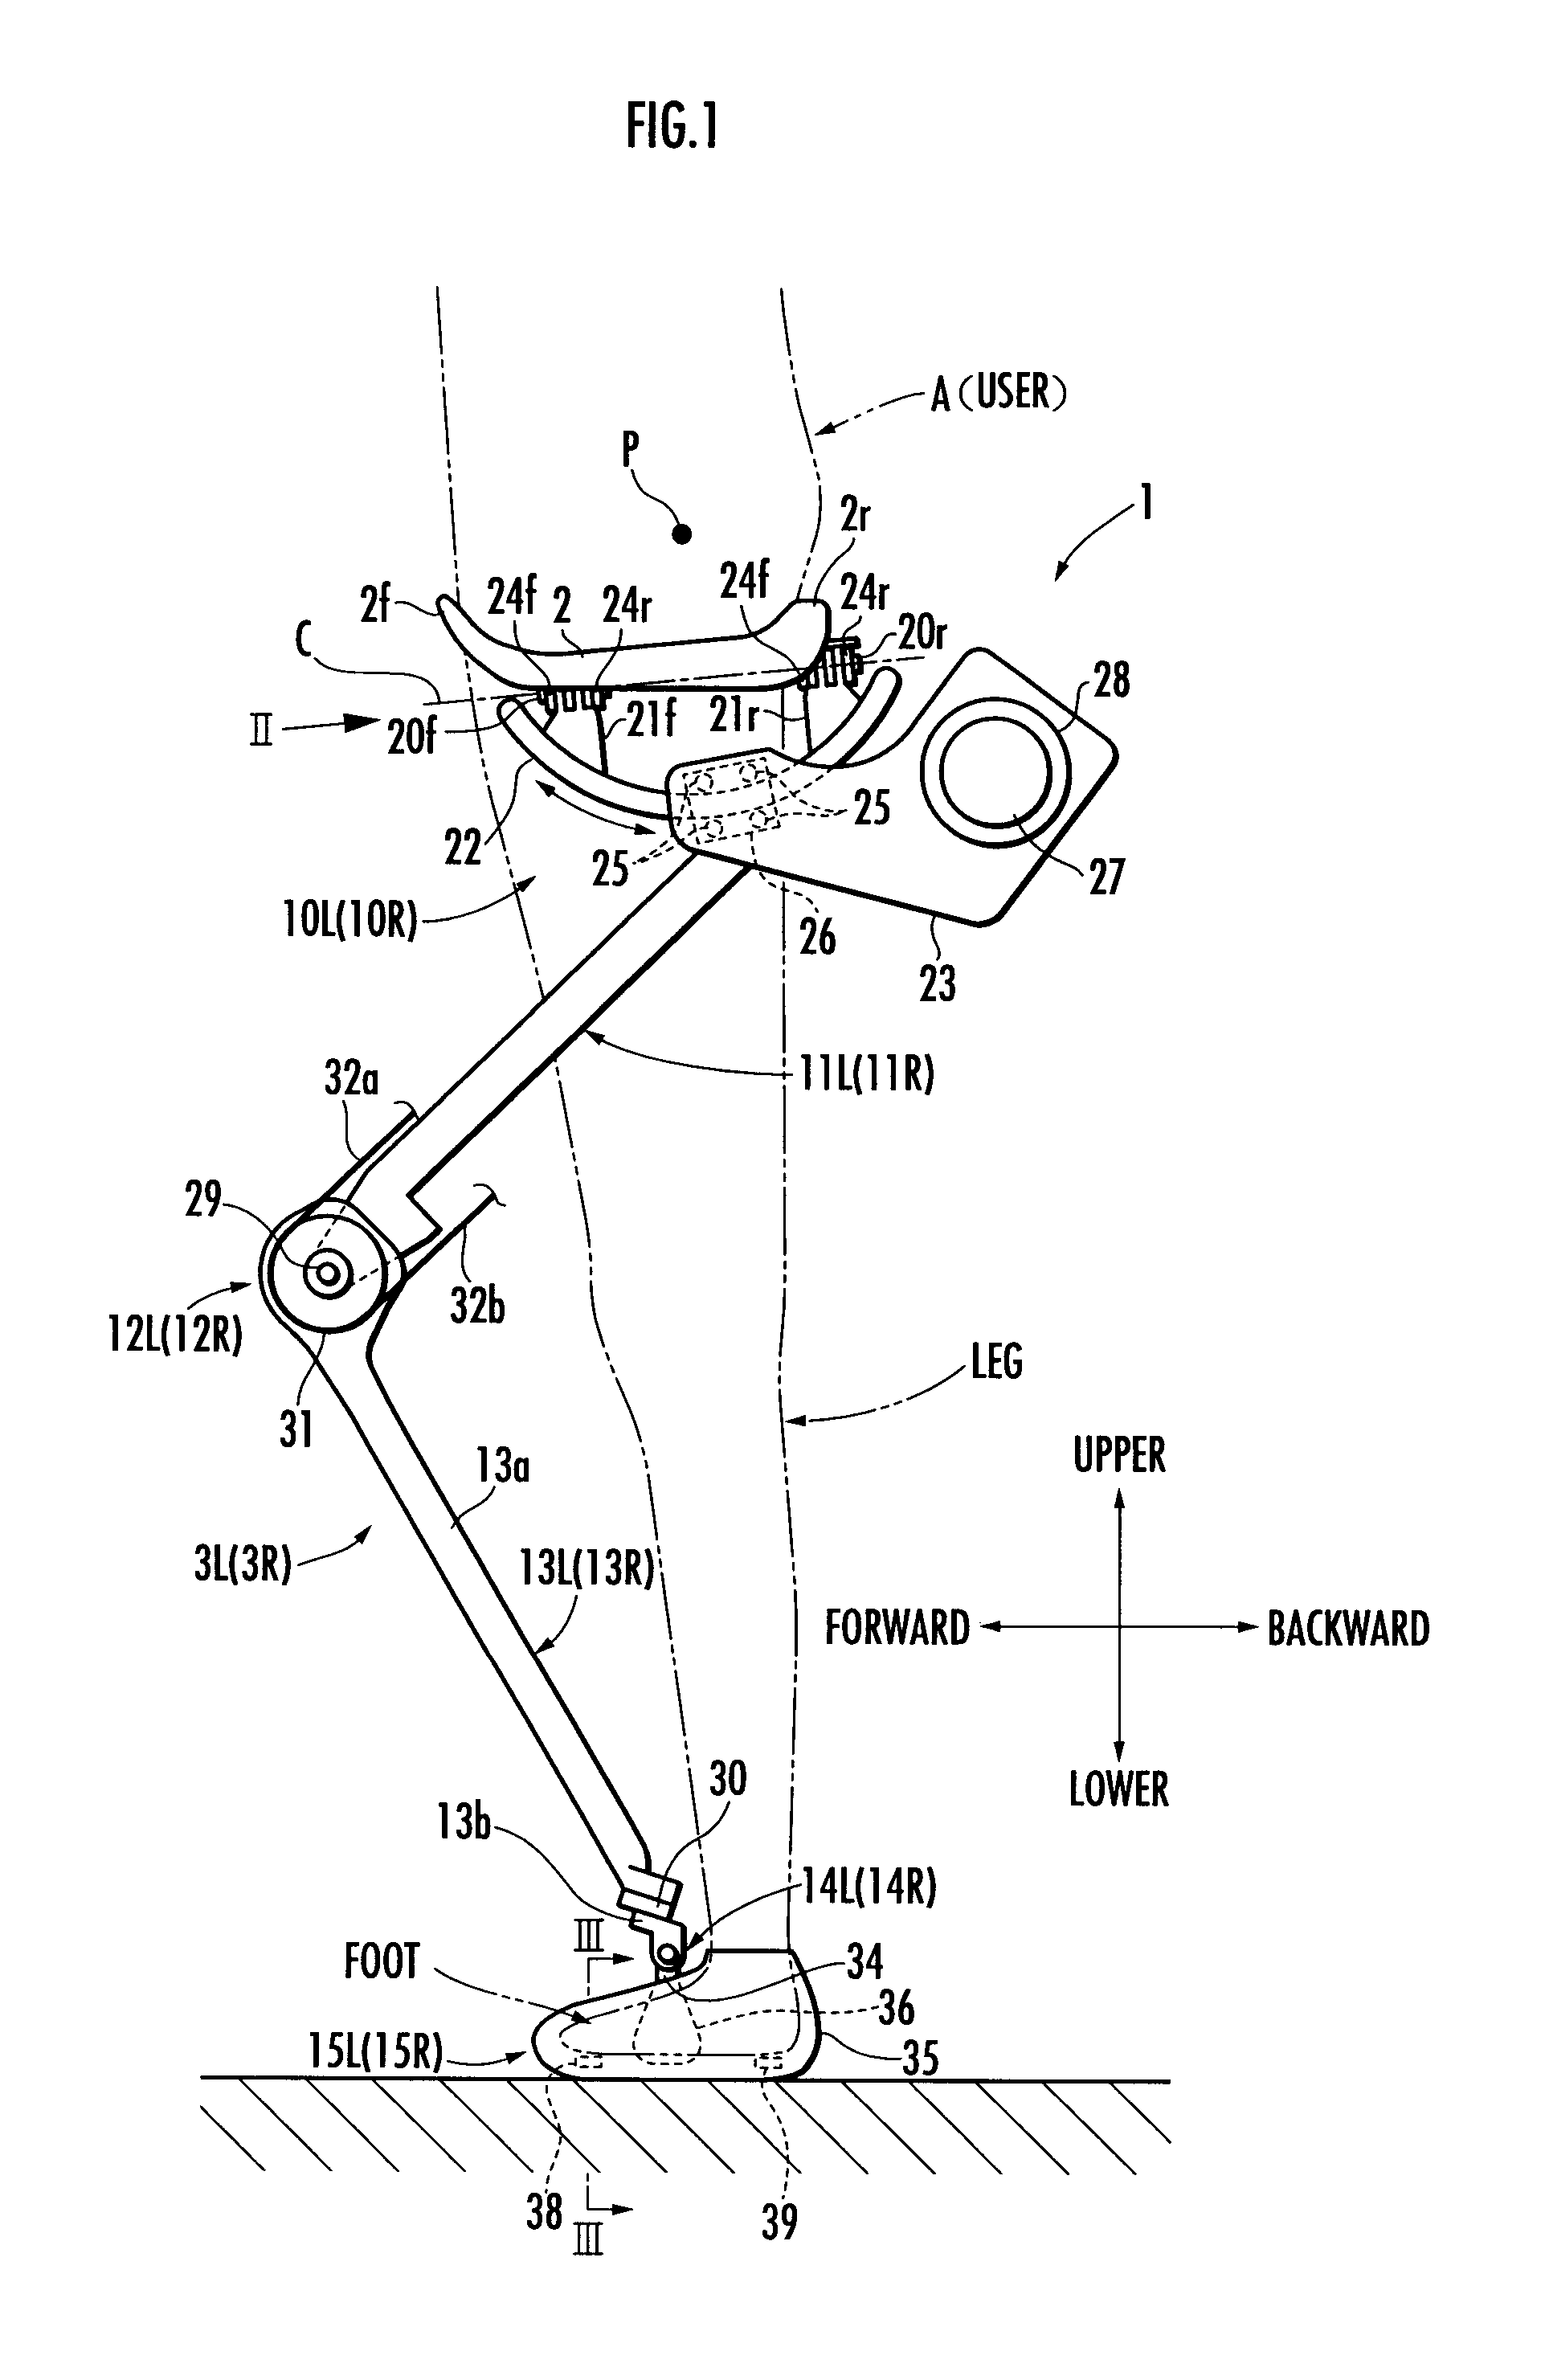 Controller for walking assistance device